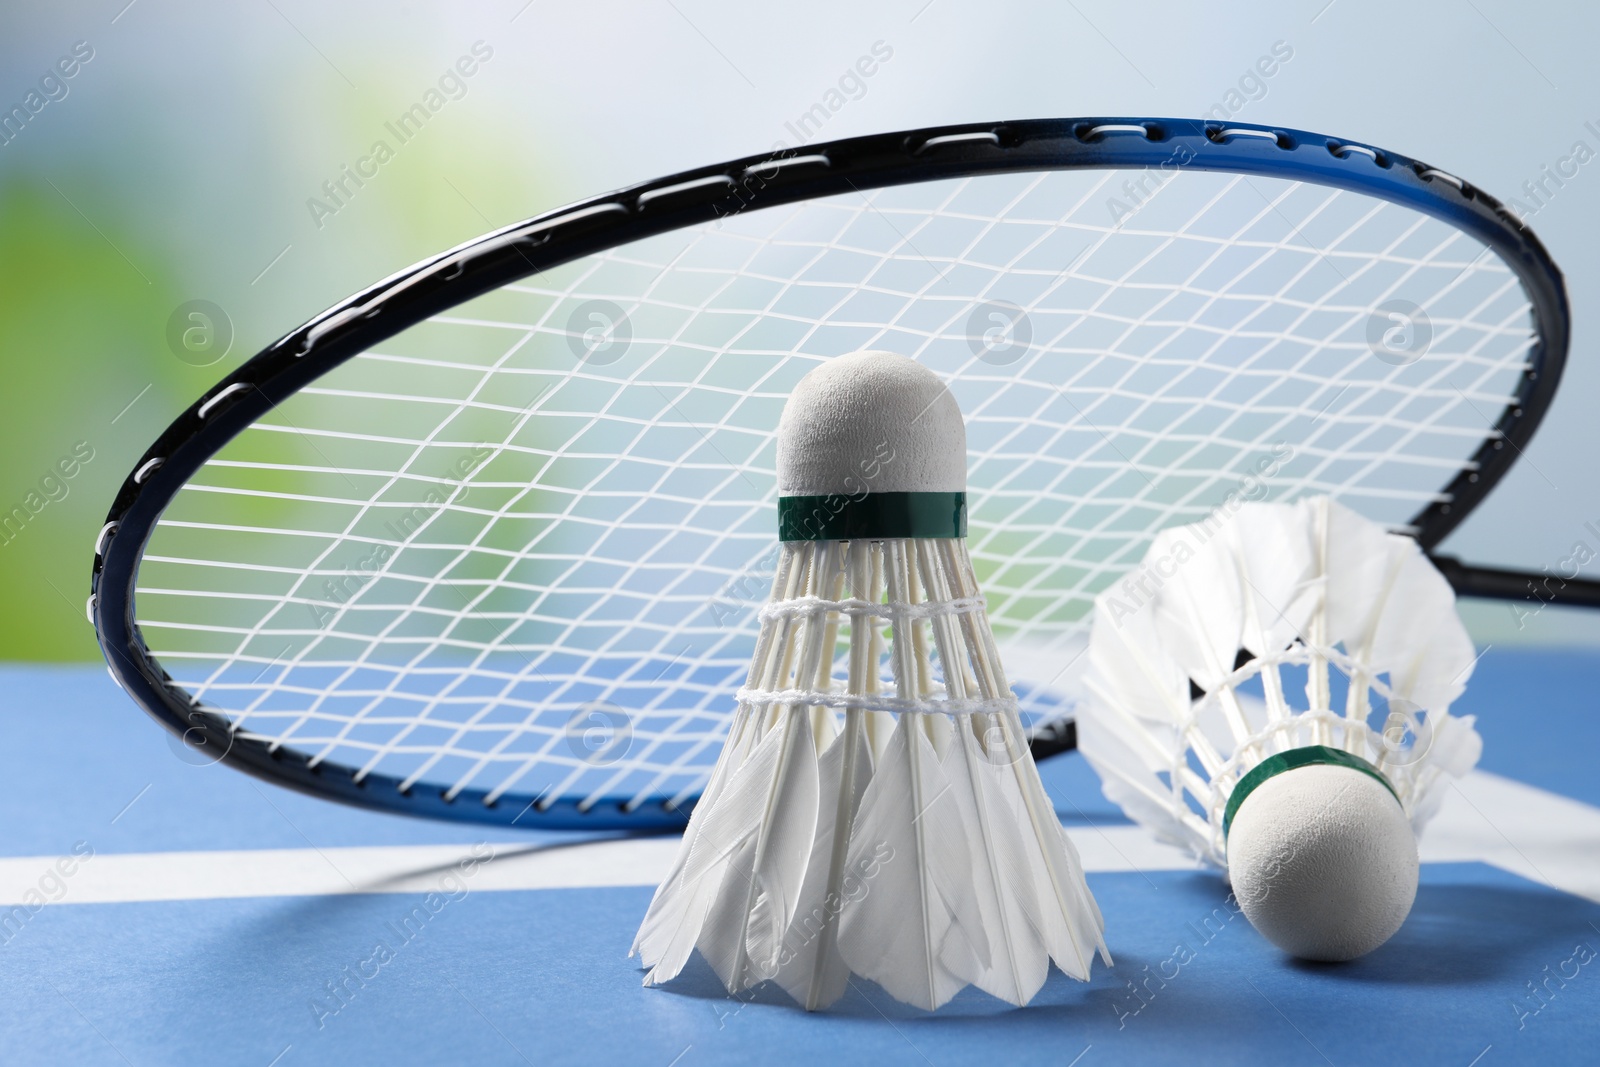 Photo of Feather badminton shuttlecocks and racket on blue table against blurred background, closeup